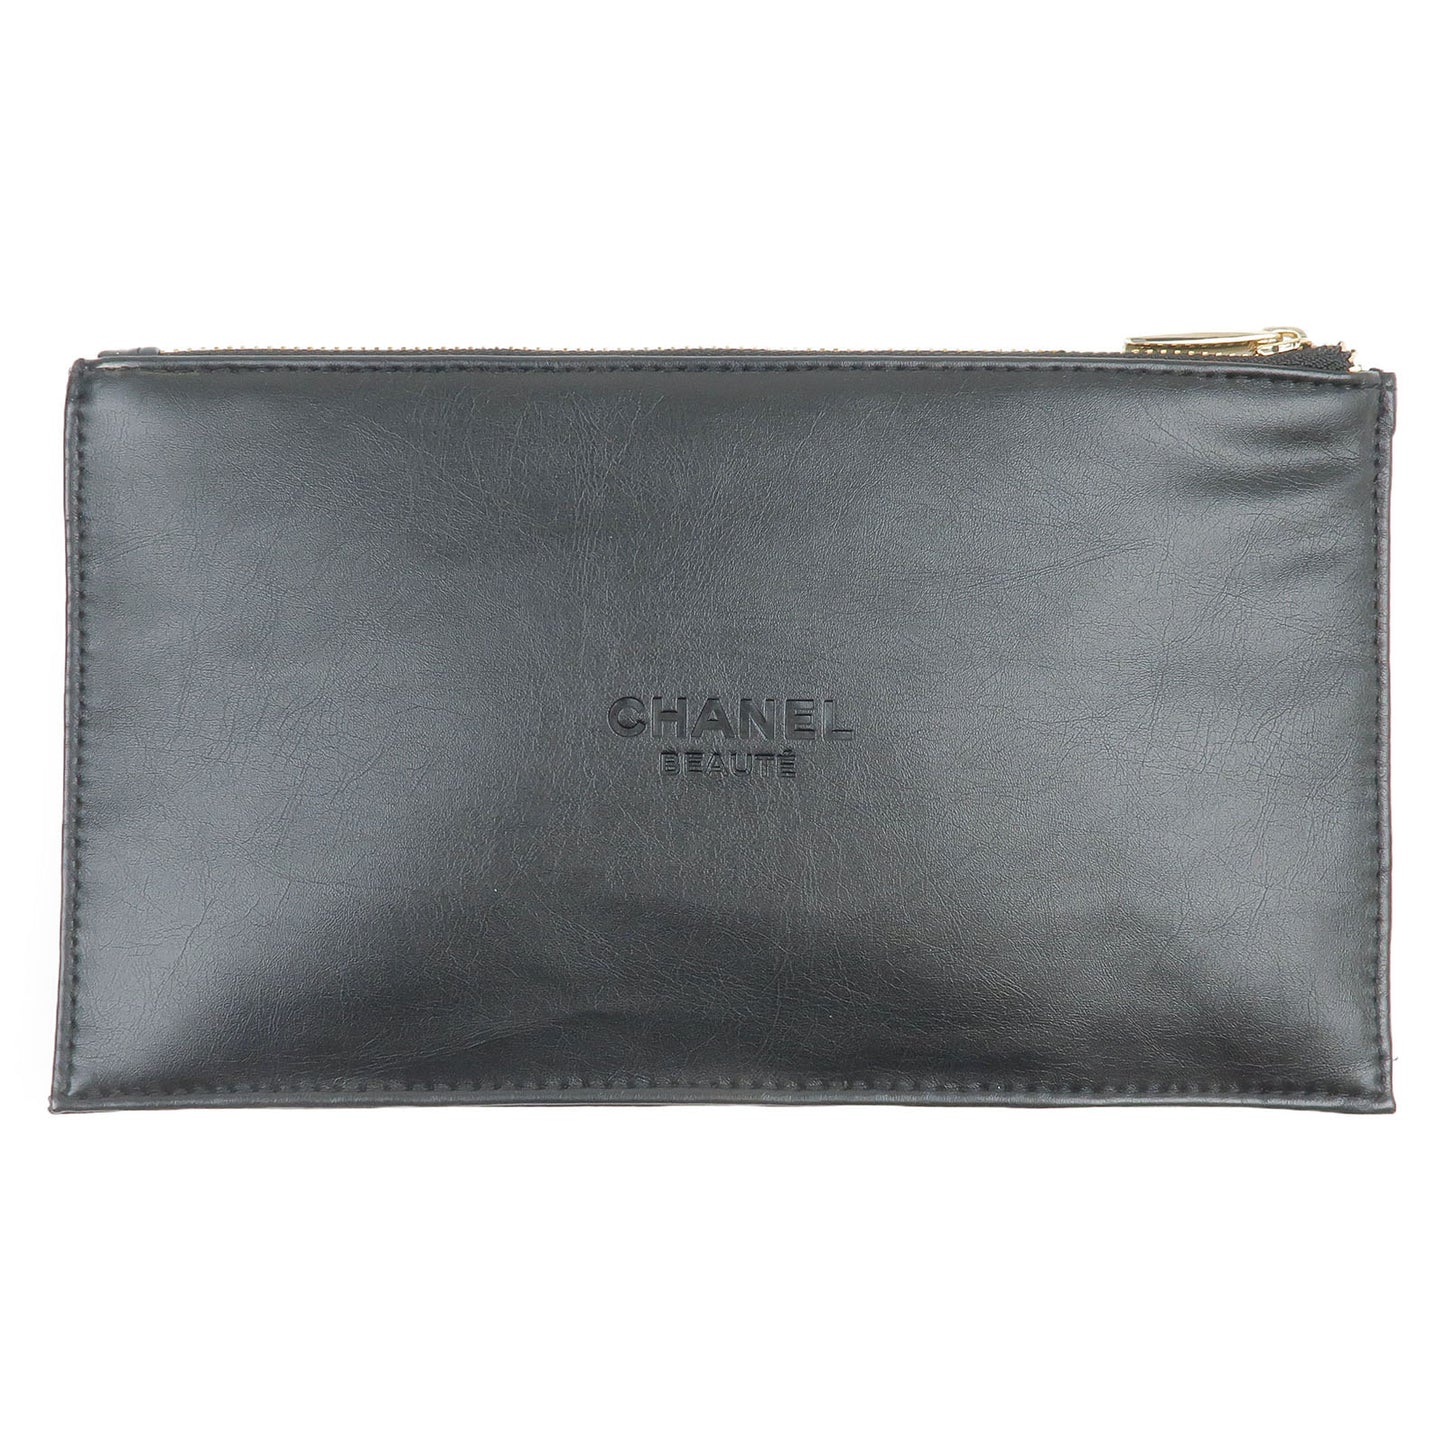 CHANEL Novelty Cosmetic Pouch and Set of 2 Makeup Brushes Black